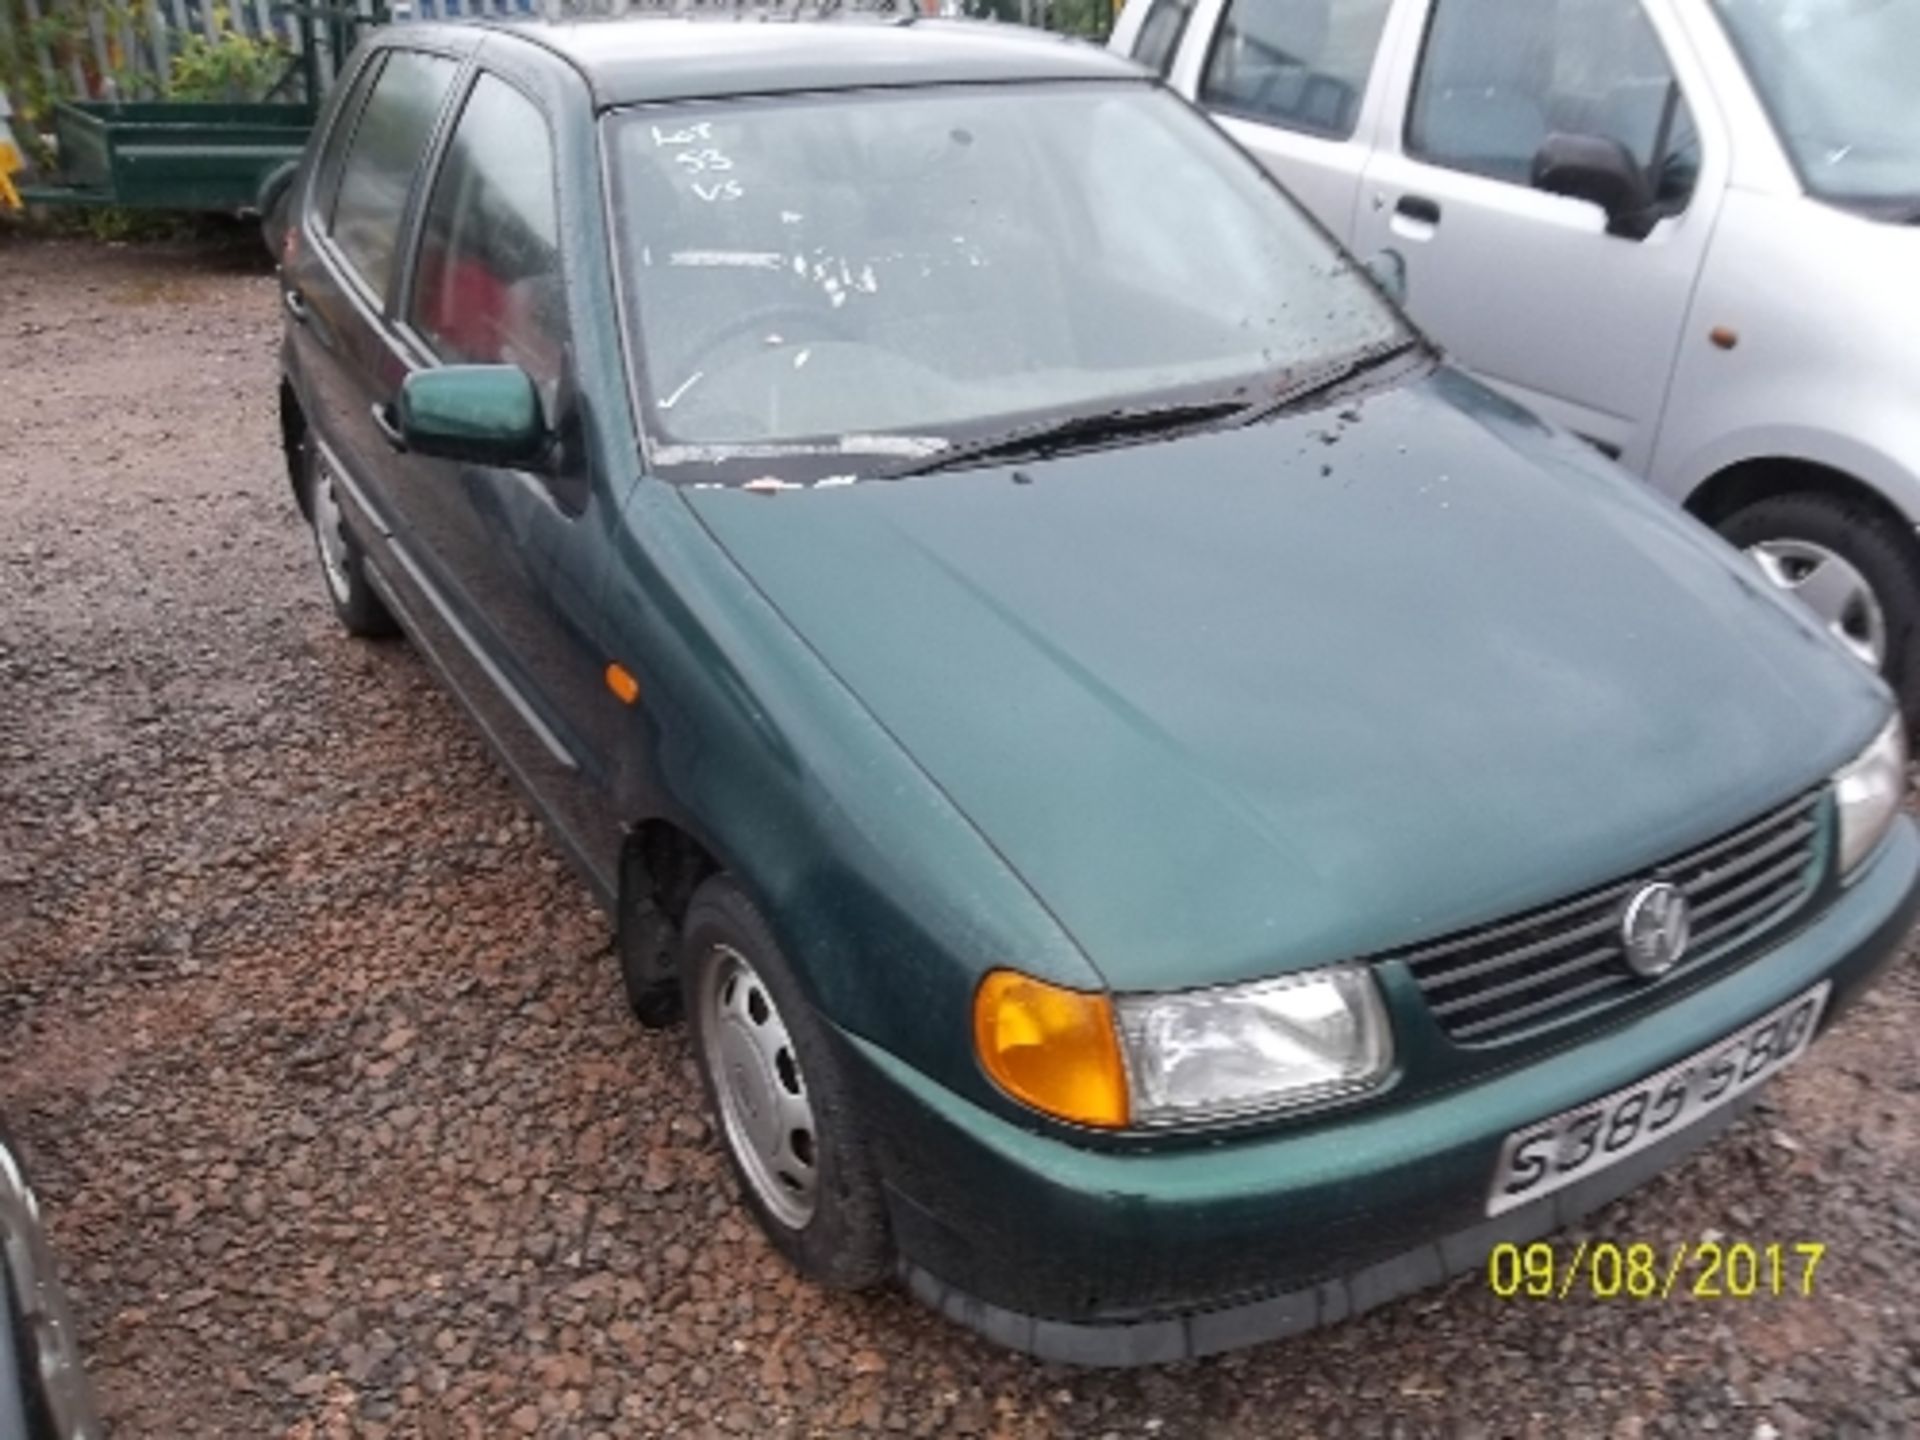 Volkswagen Polo 1.4 L - S385 SBO Date of registration: 22.09.1998 1390cc, petrol, manual, green - Image 2 of 4